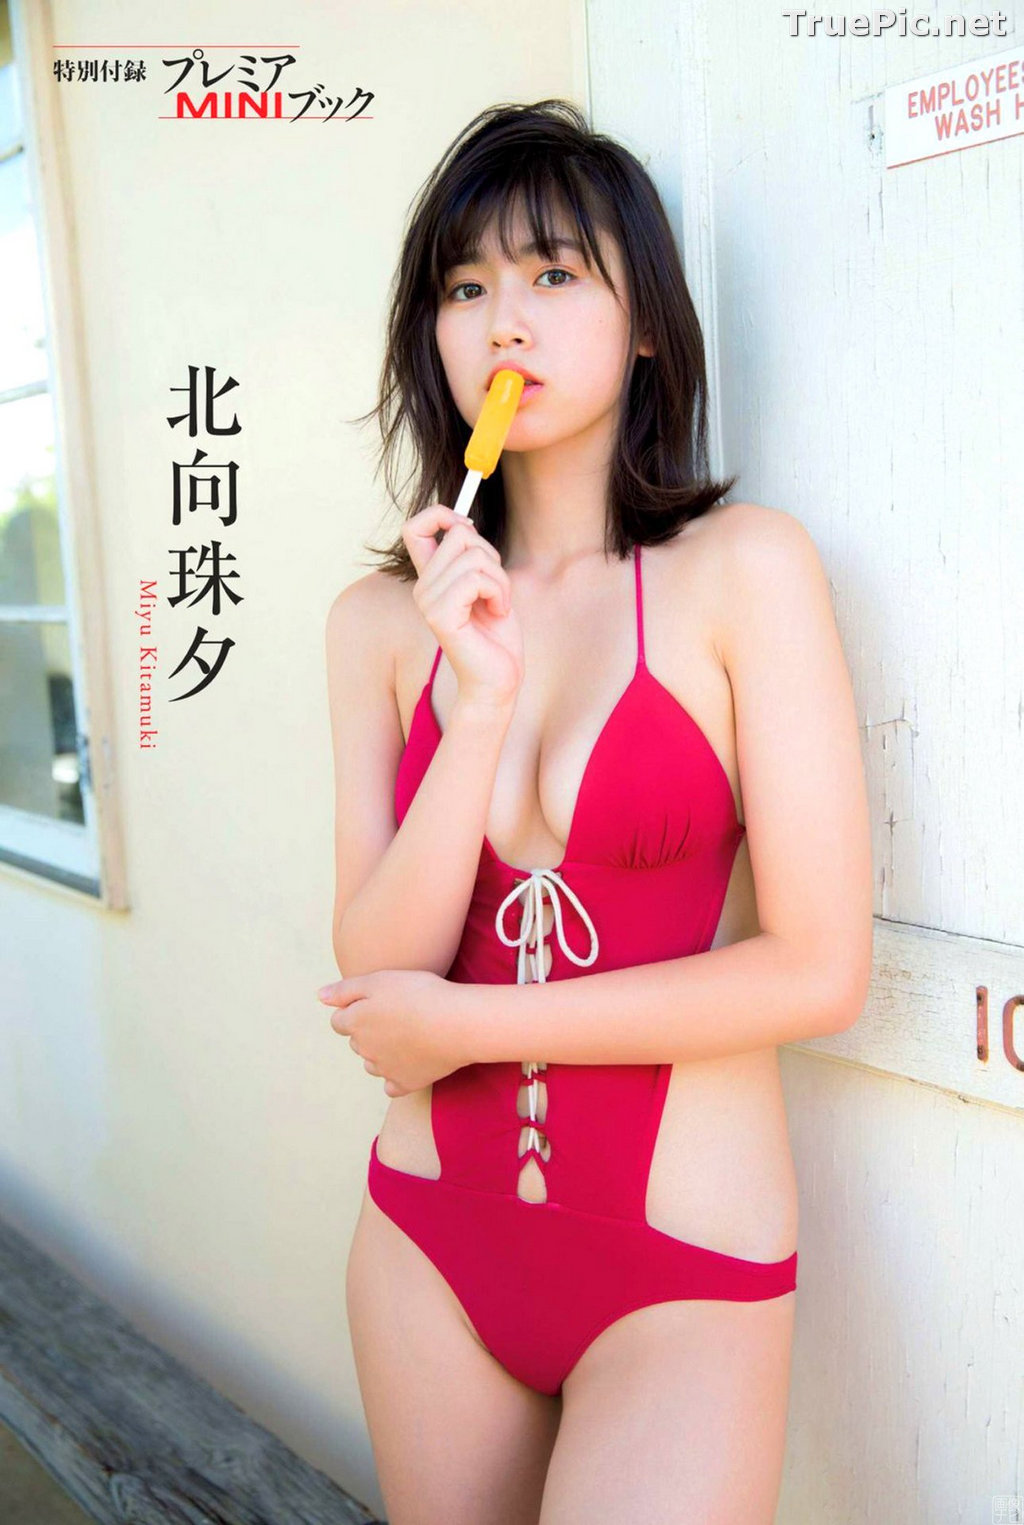 ImageJapanese Gravure Idol and Actress - Kitamuki Miyu (北向珠夕) - Sexy Picture Collection 2020 - TruePic.net - Picture-72